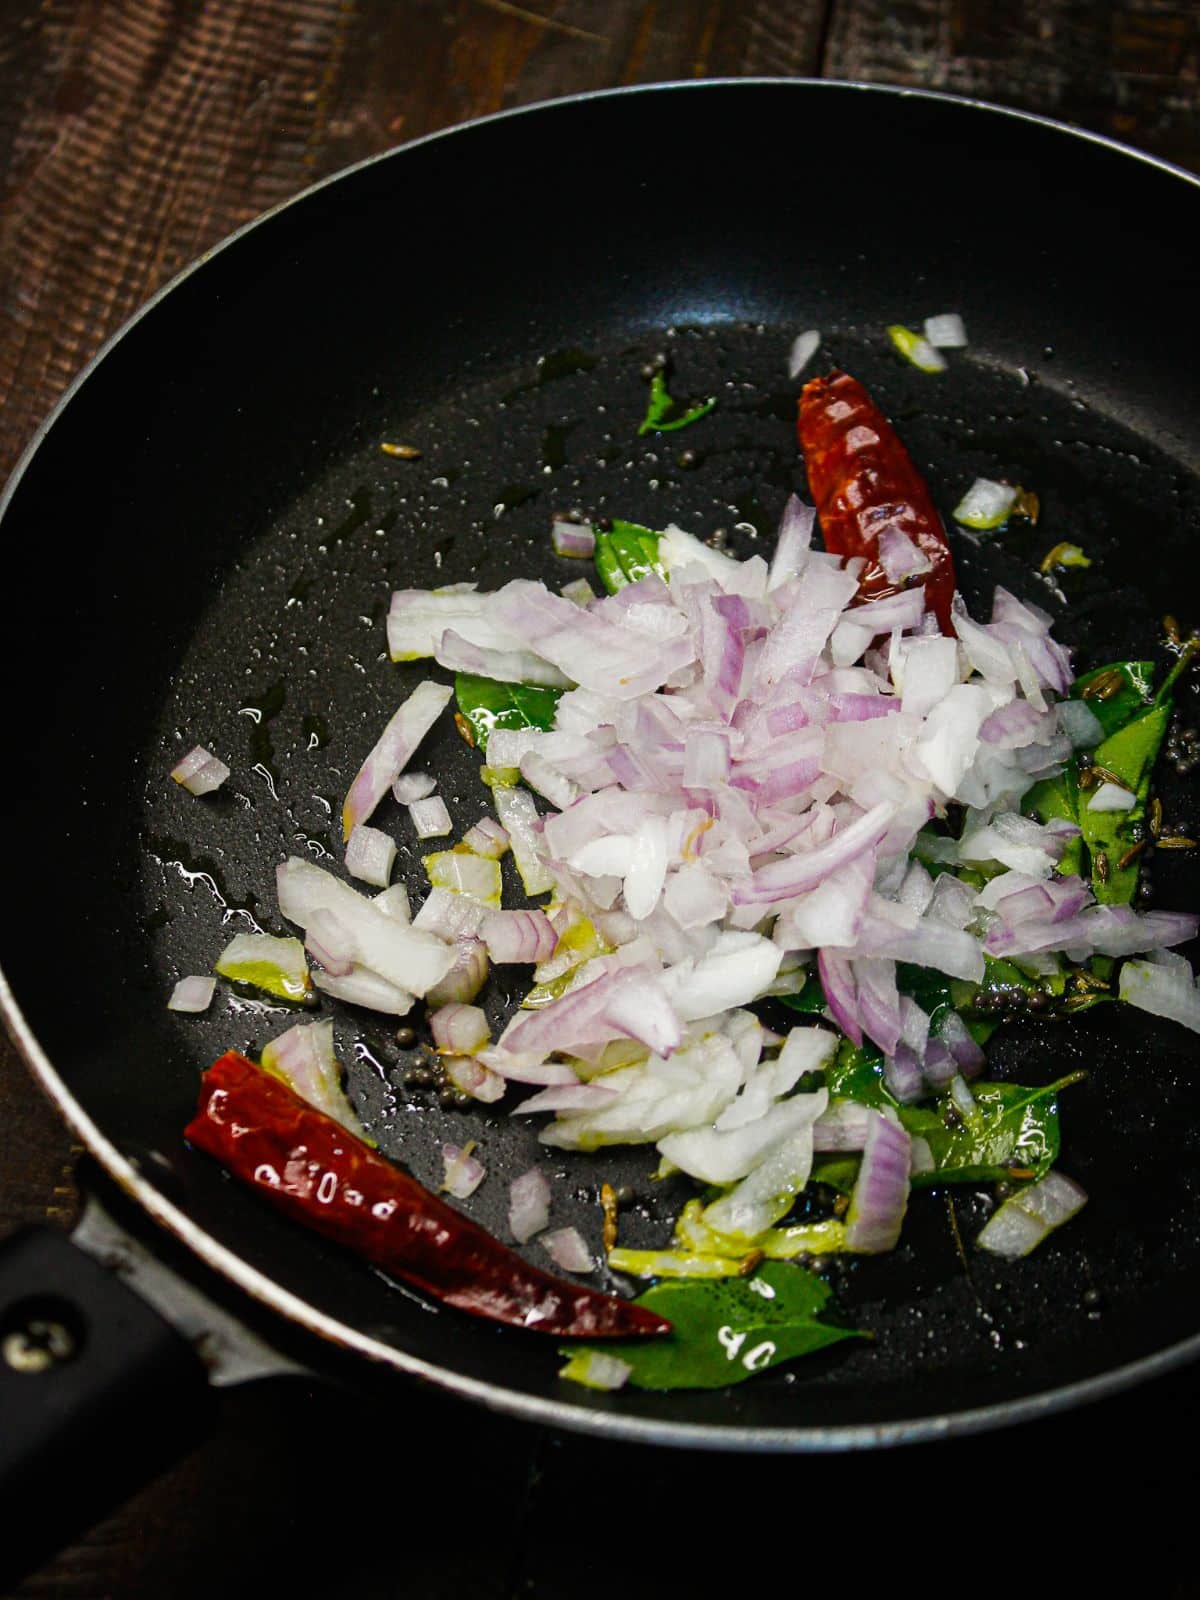 Add chopped onions to the saute 